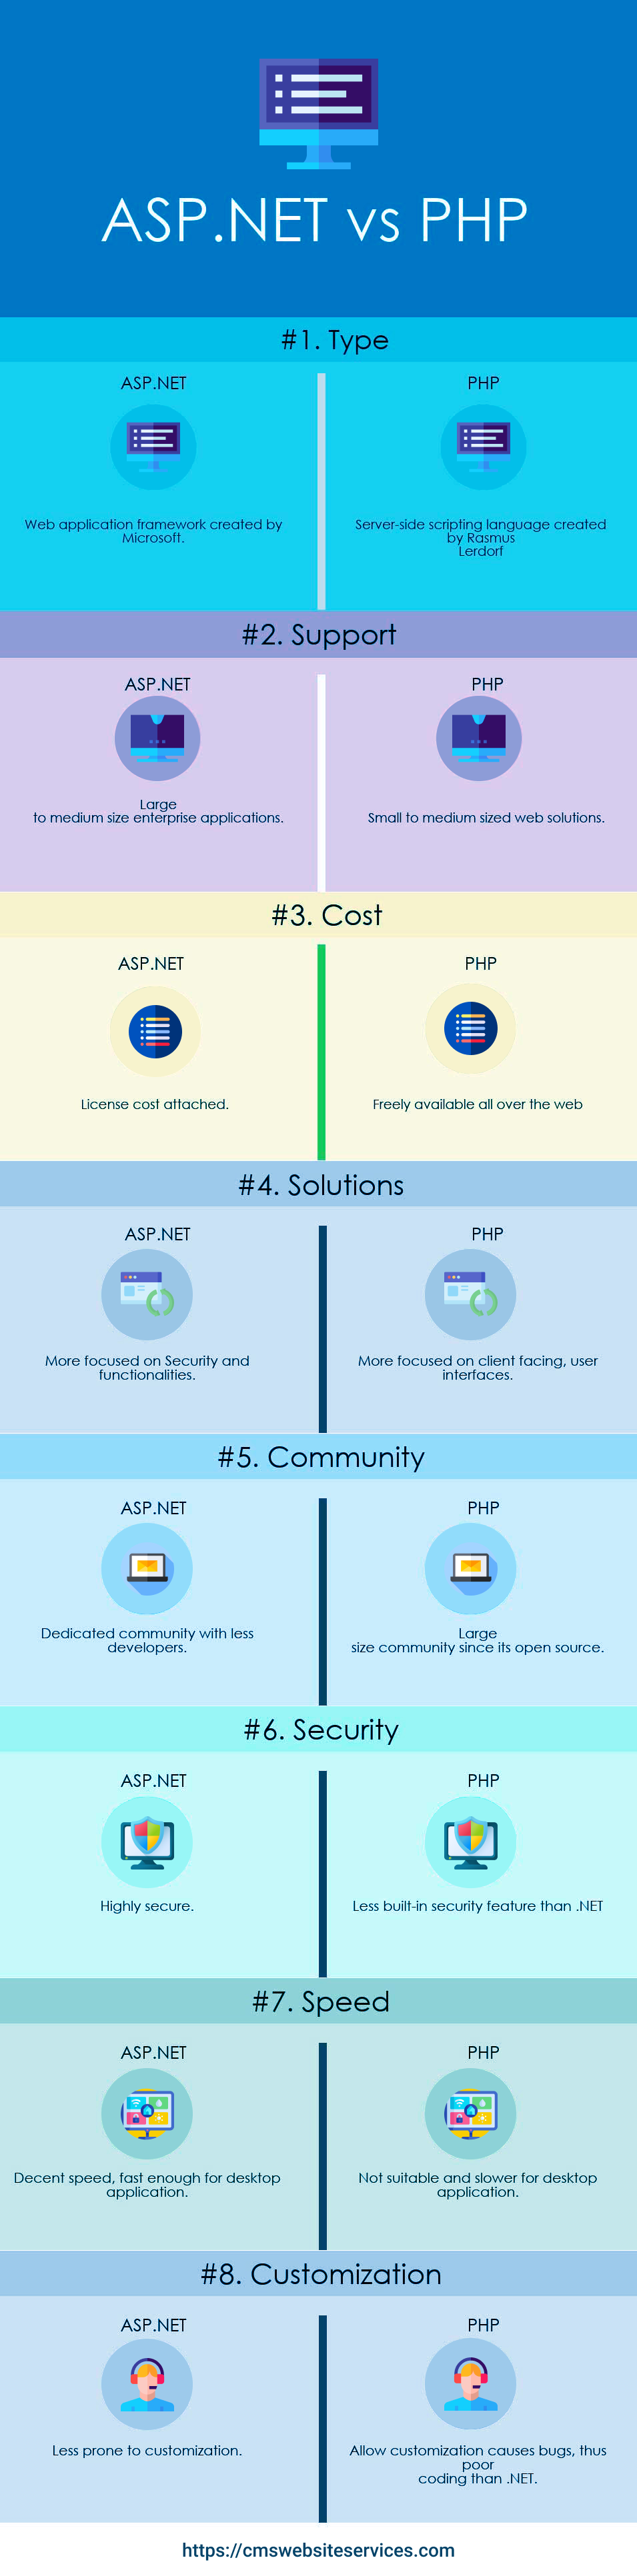 PHP vs ASP.NET: Which Is Better For Development